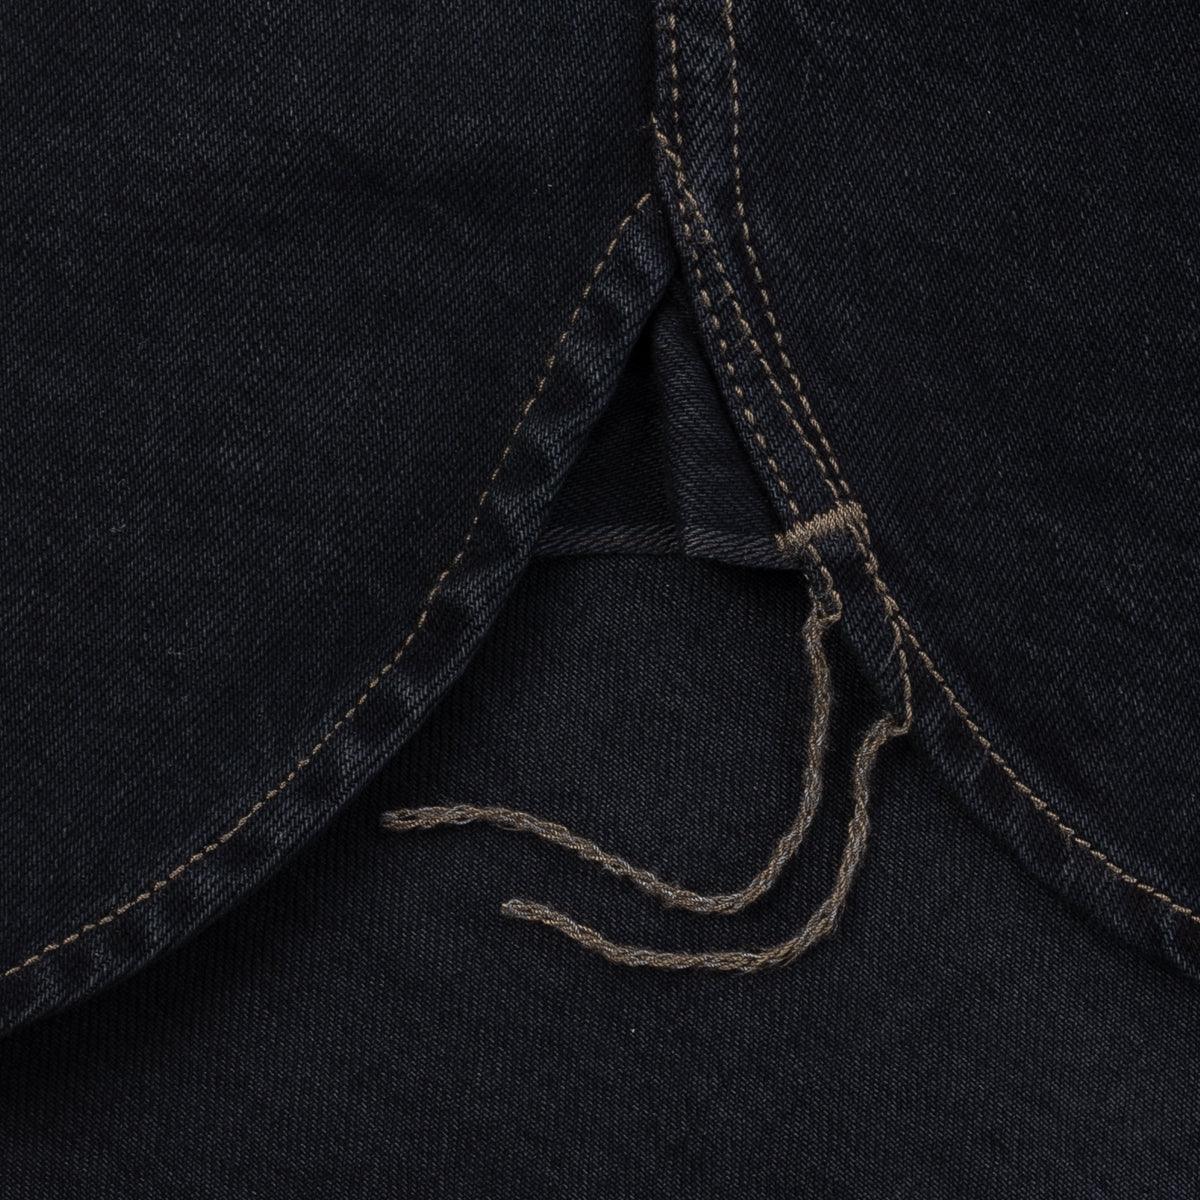 Iron Heart 12oz Selvedge Denim Work Shirt With Snaps IHSH-326-OD - Indigo Overdyed Black - Guilty Party